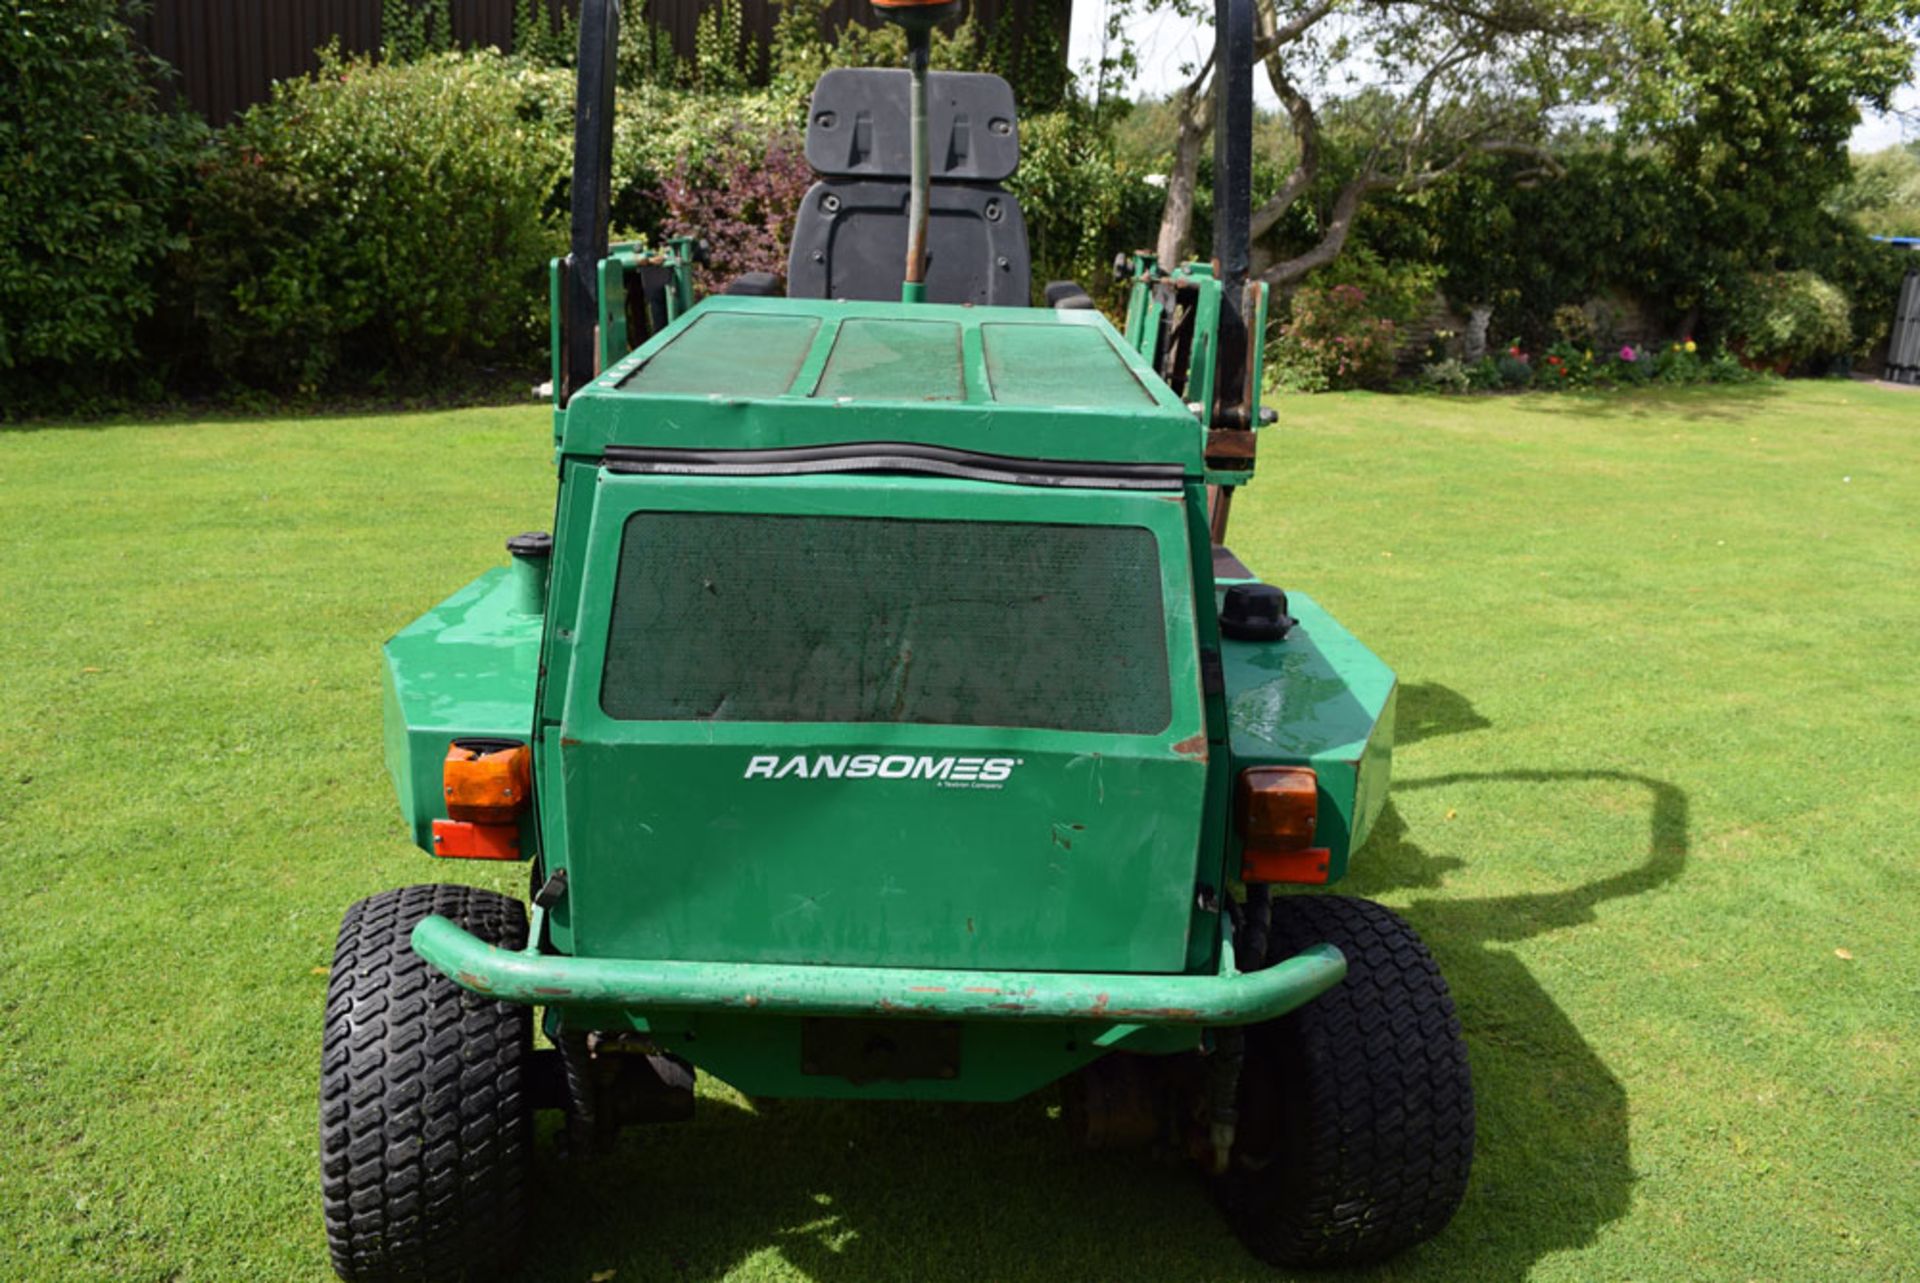 2003 Ransomes Parkway 2250 Plus Ride On Cylinder Mower - Image 7 of 8